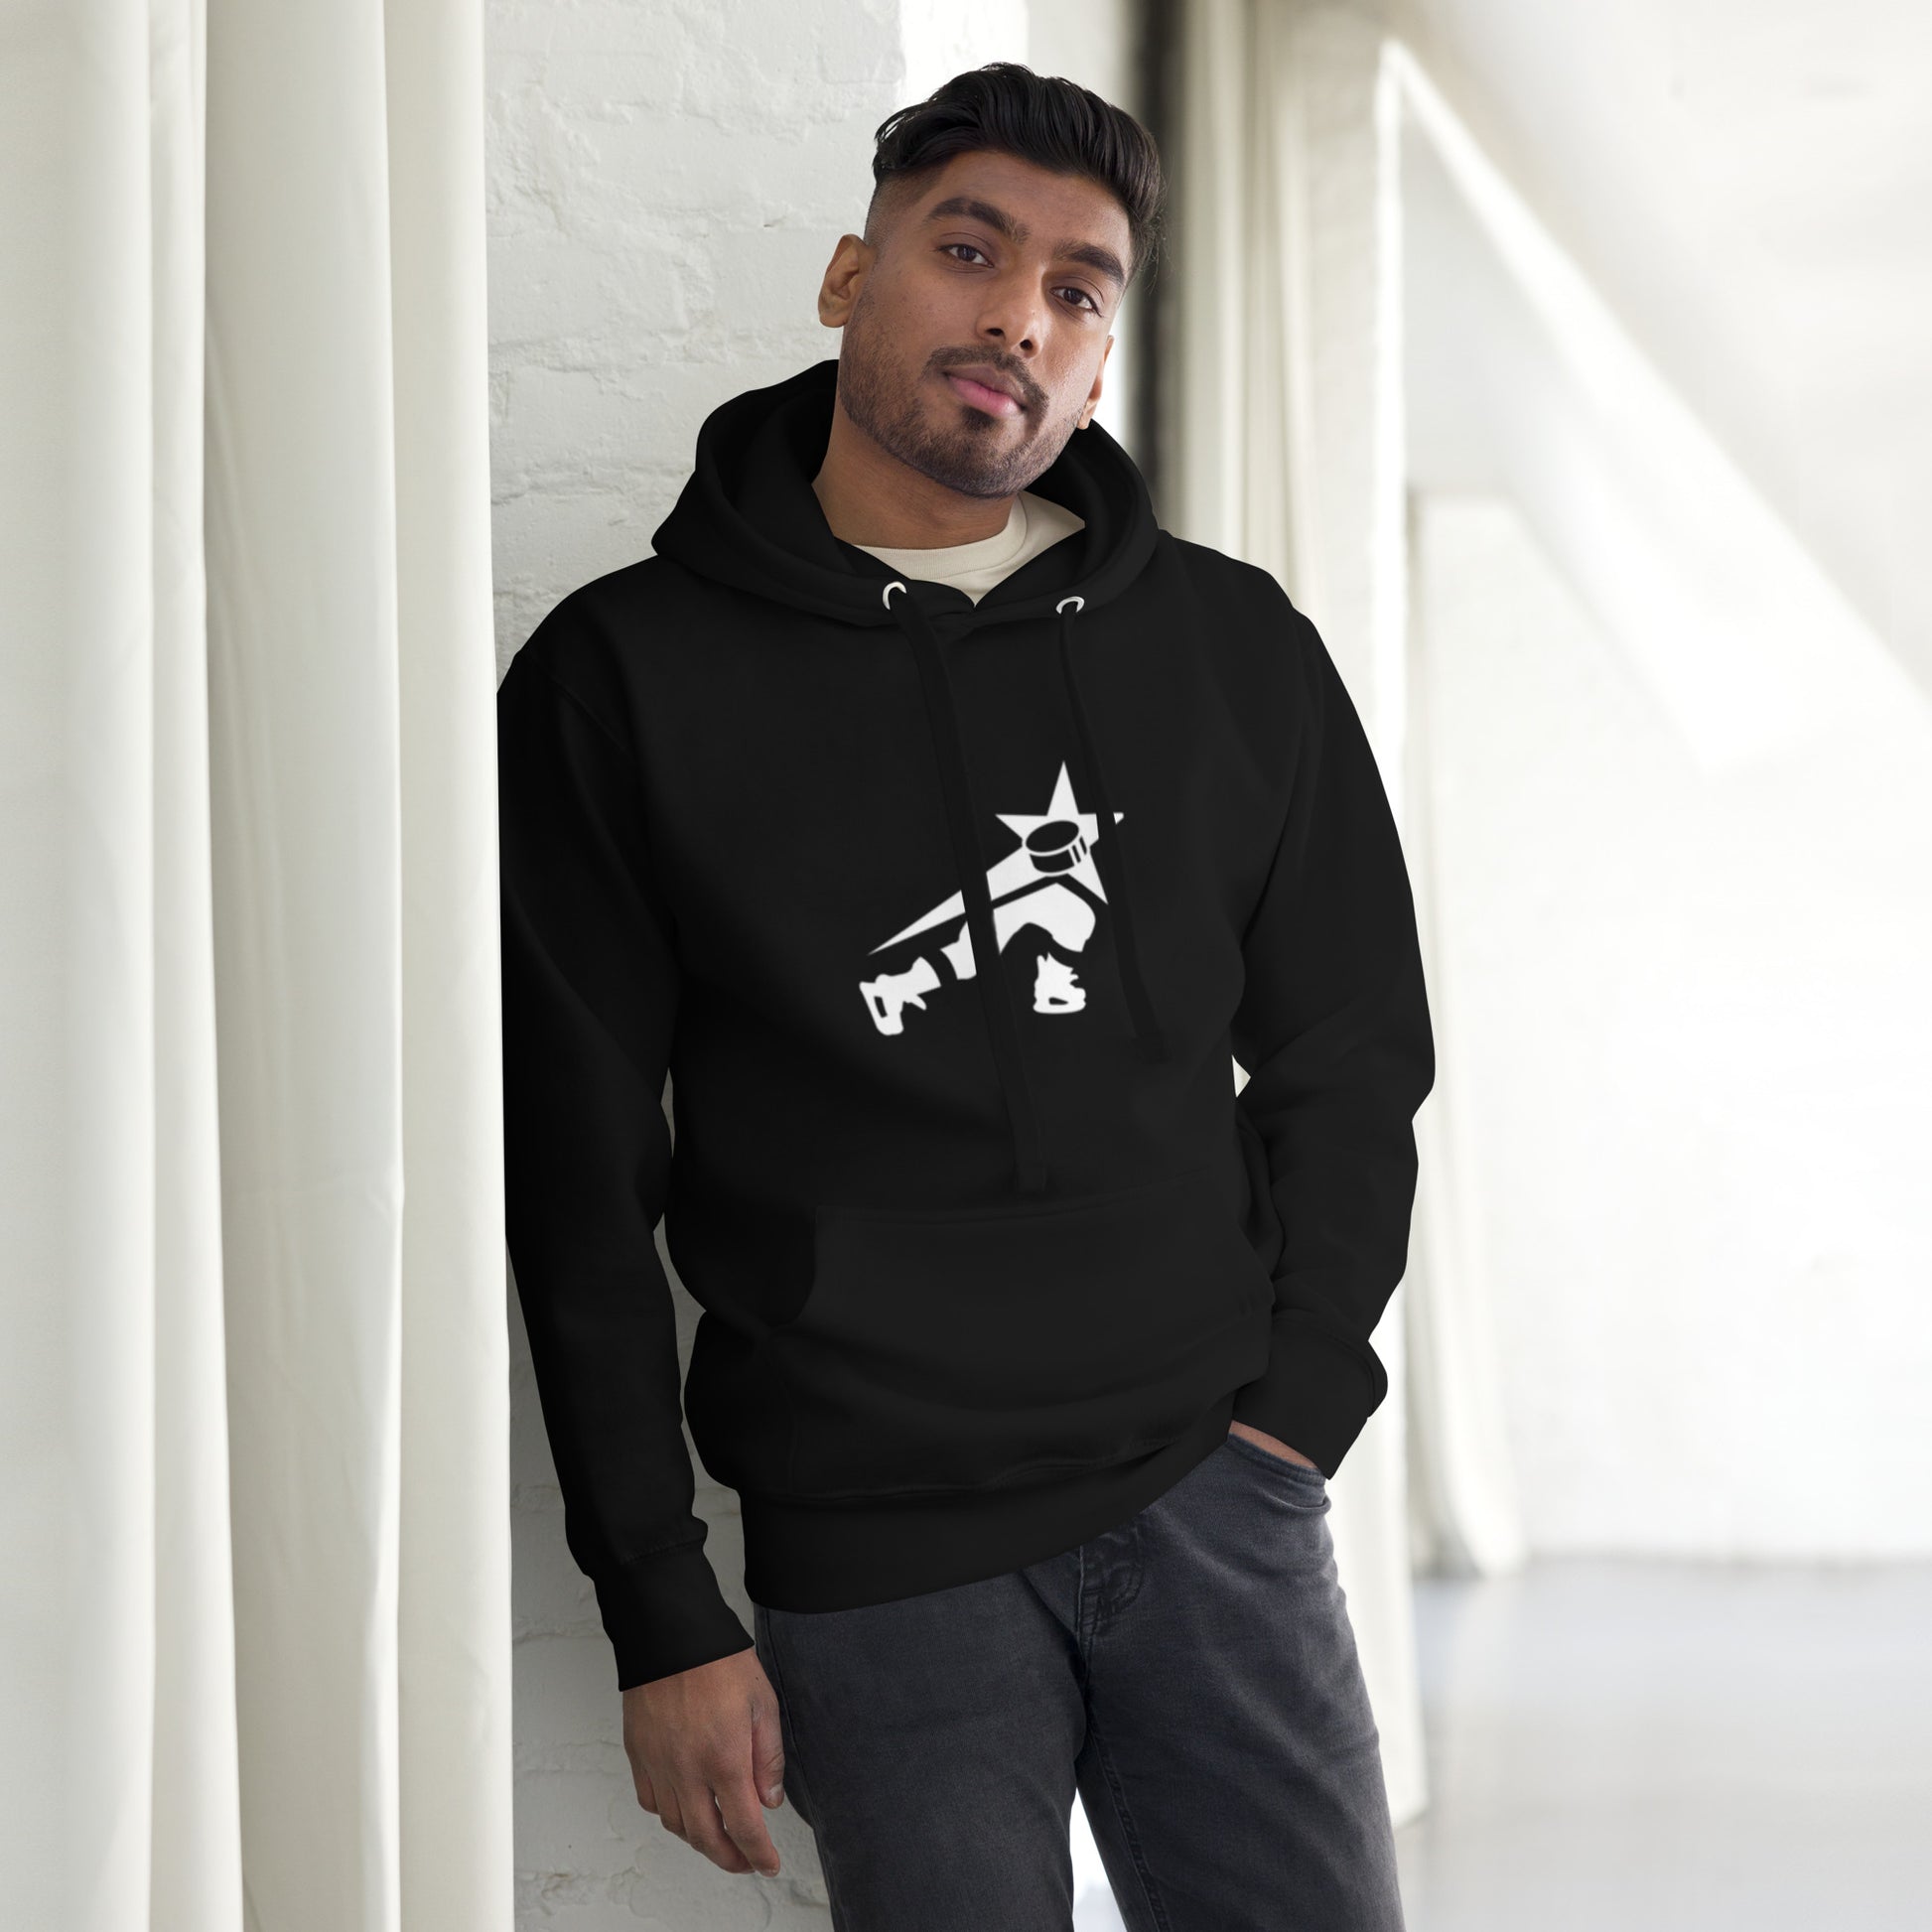 Confident man wearing a black heather gray hoodie 